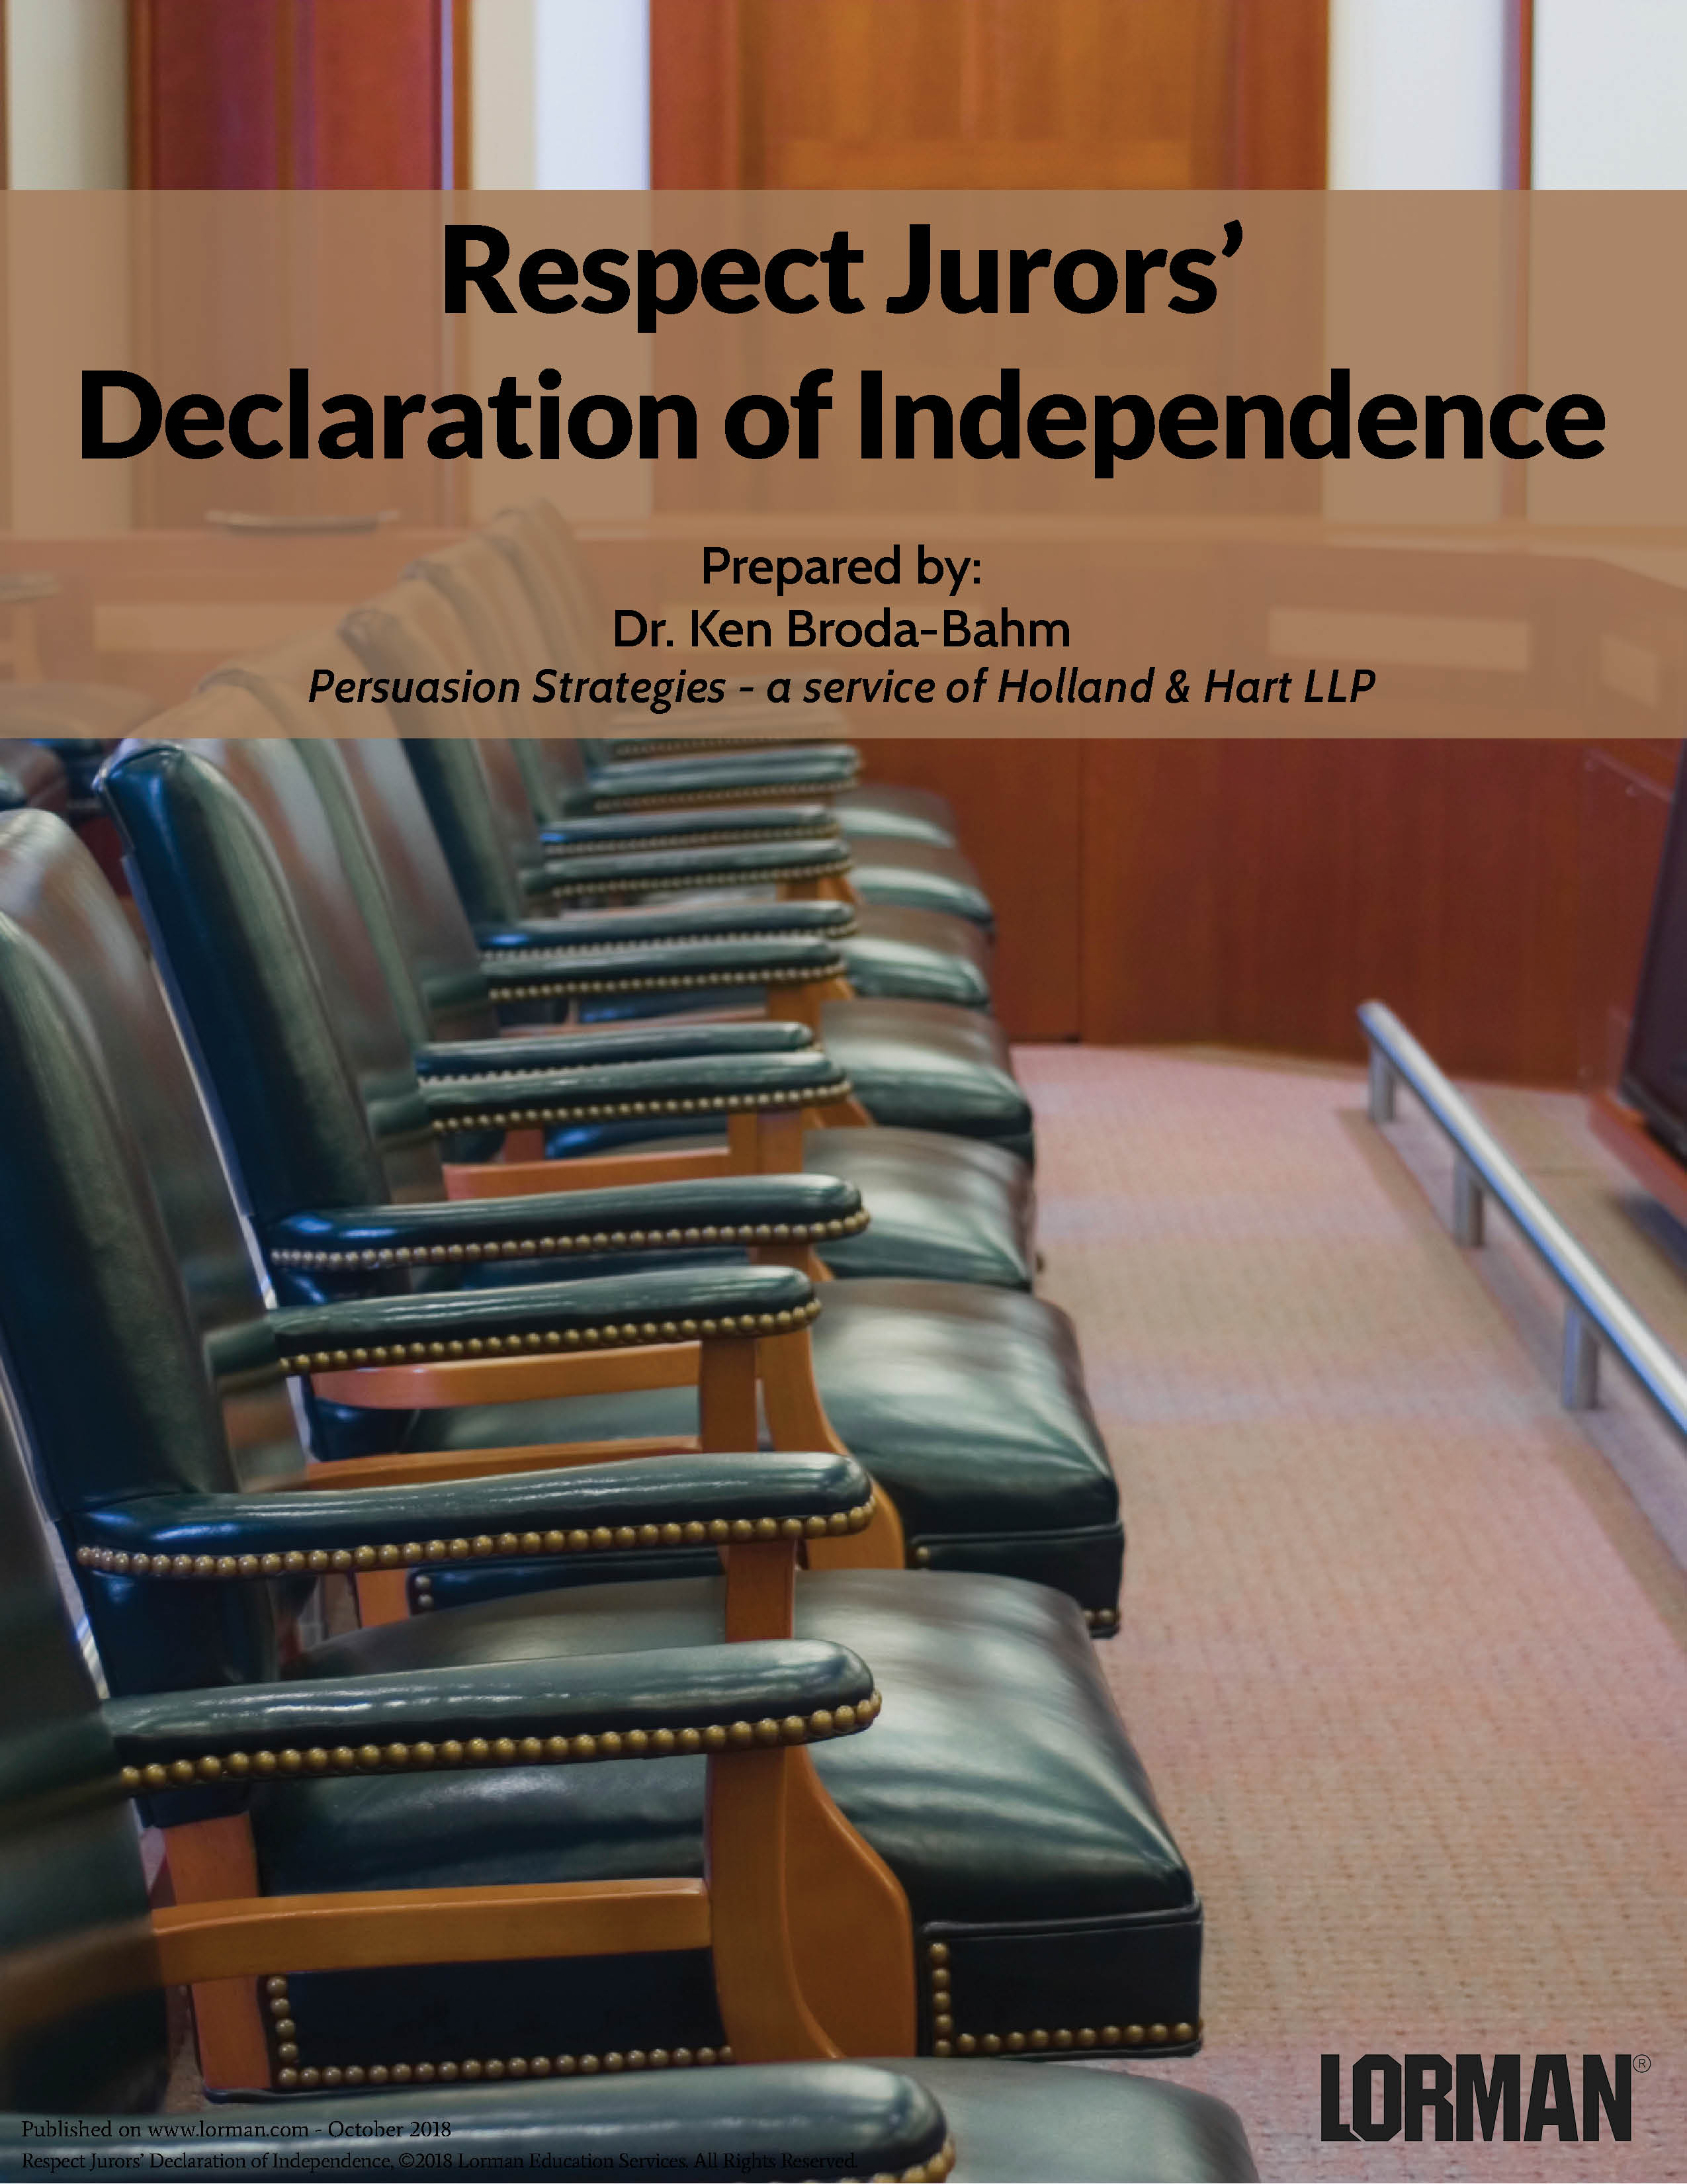 Respect Jurors’ Declaration of Independence